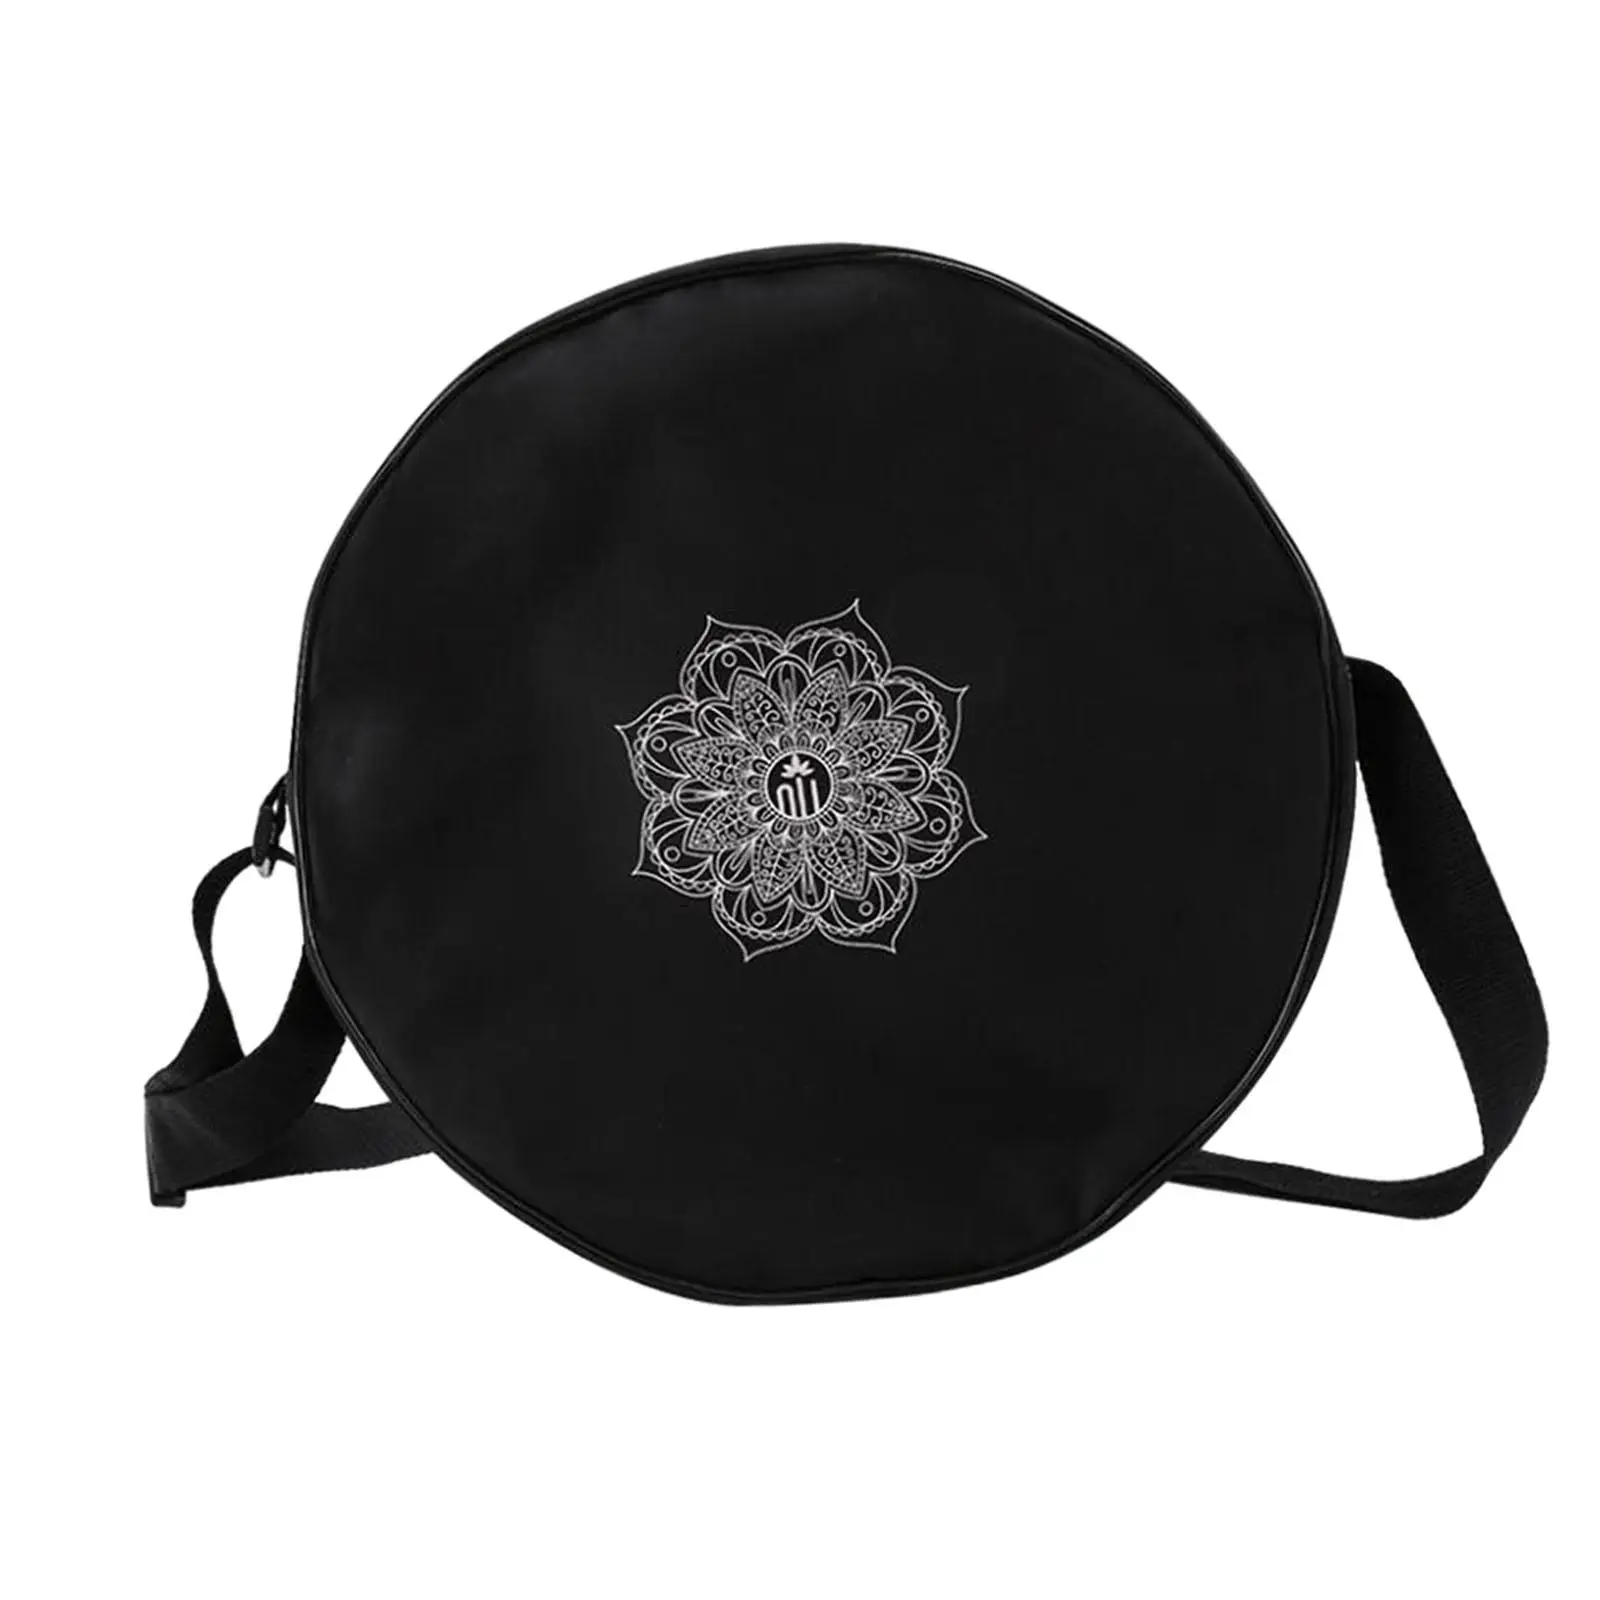 Yoga Wheel Bag Wear Resistant Stable Strong Load Bearing Durable Yoga Roller Ring Wheel Bag for Body Building Back Training Tool